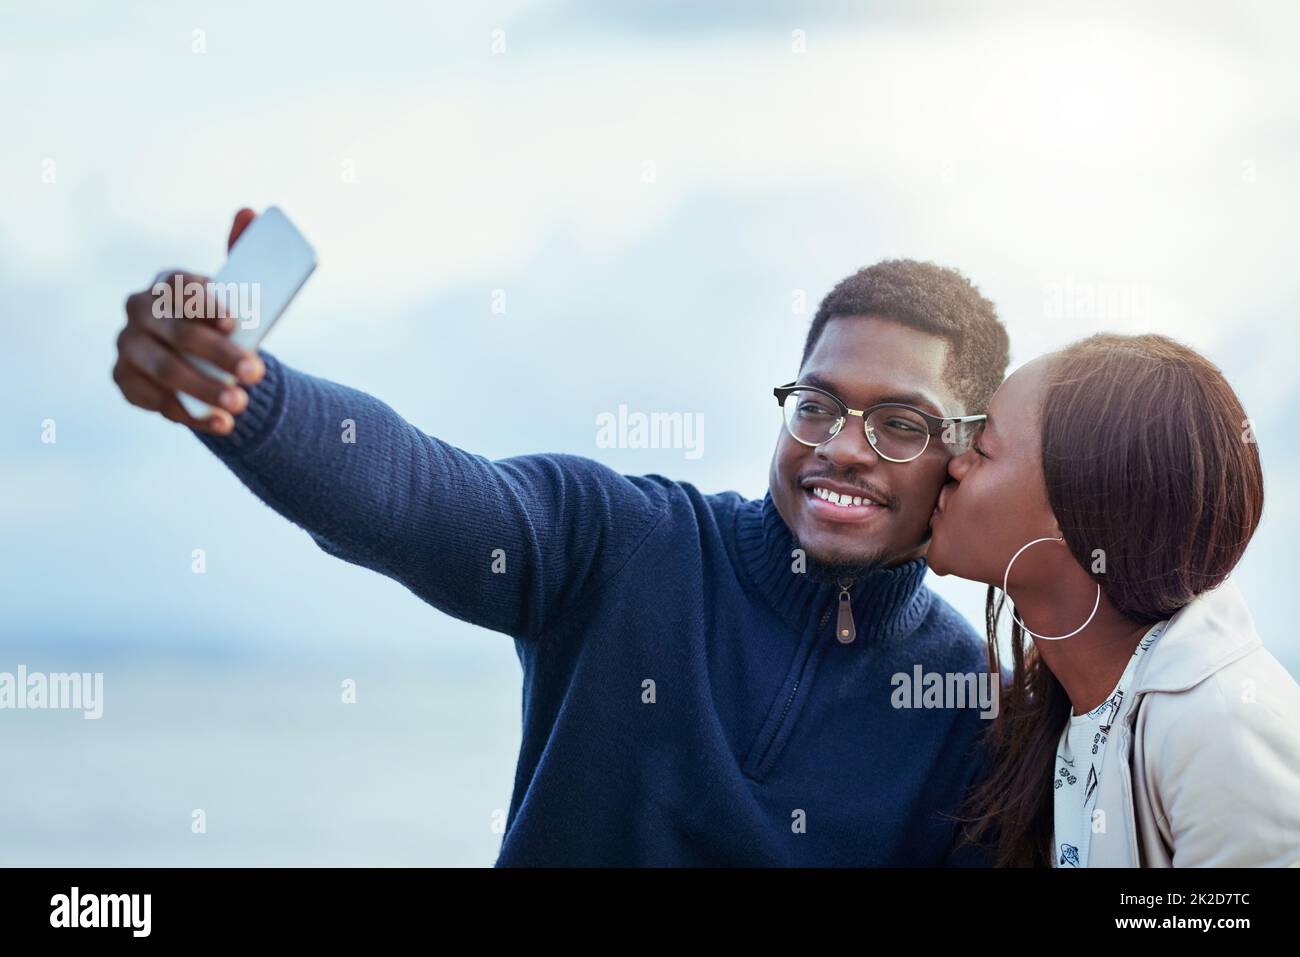 Theyre definitely madly in love. Shot of an affectionate young couple taking selfies together outdoors. Stock Photo